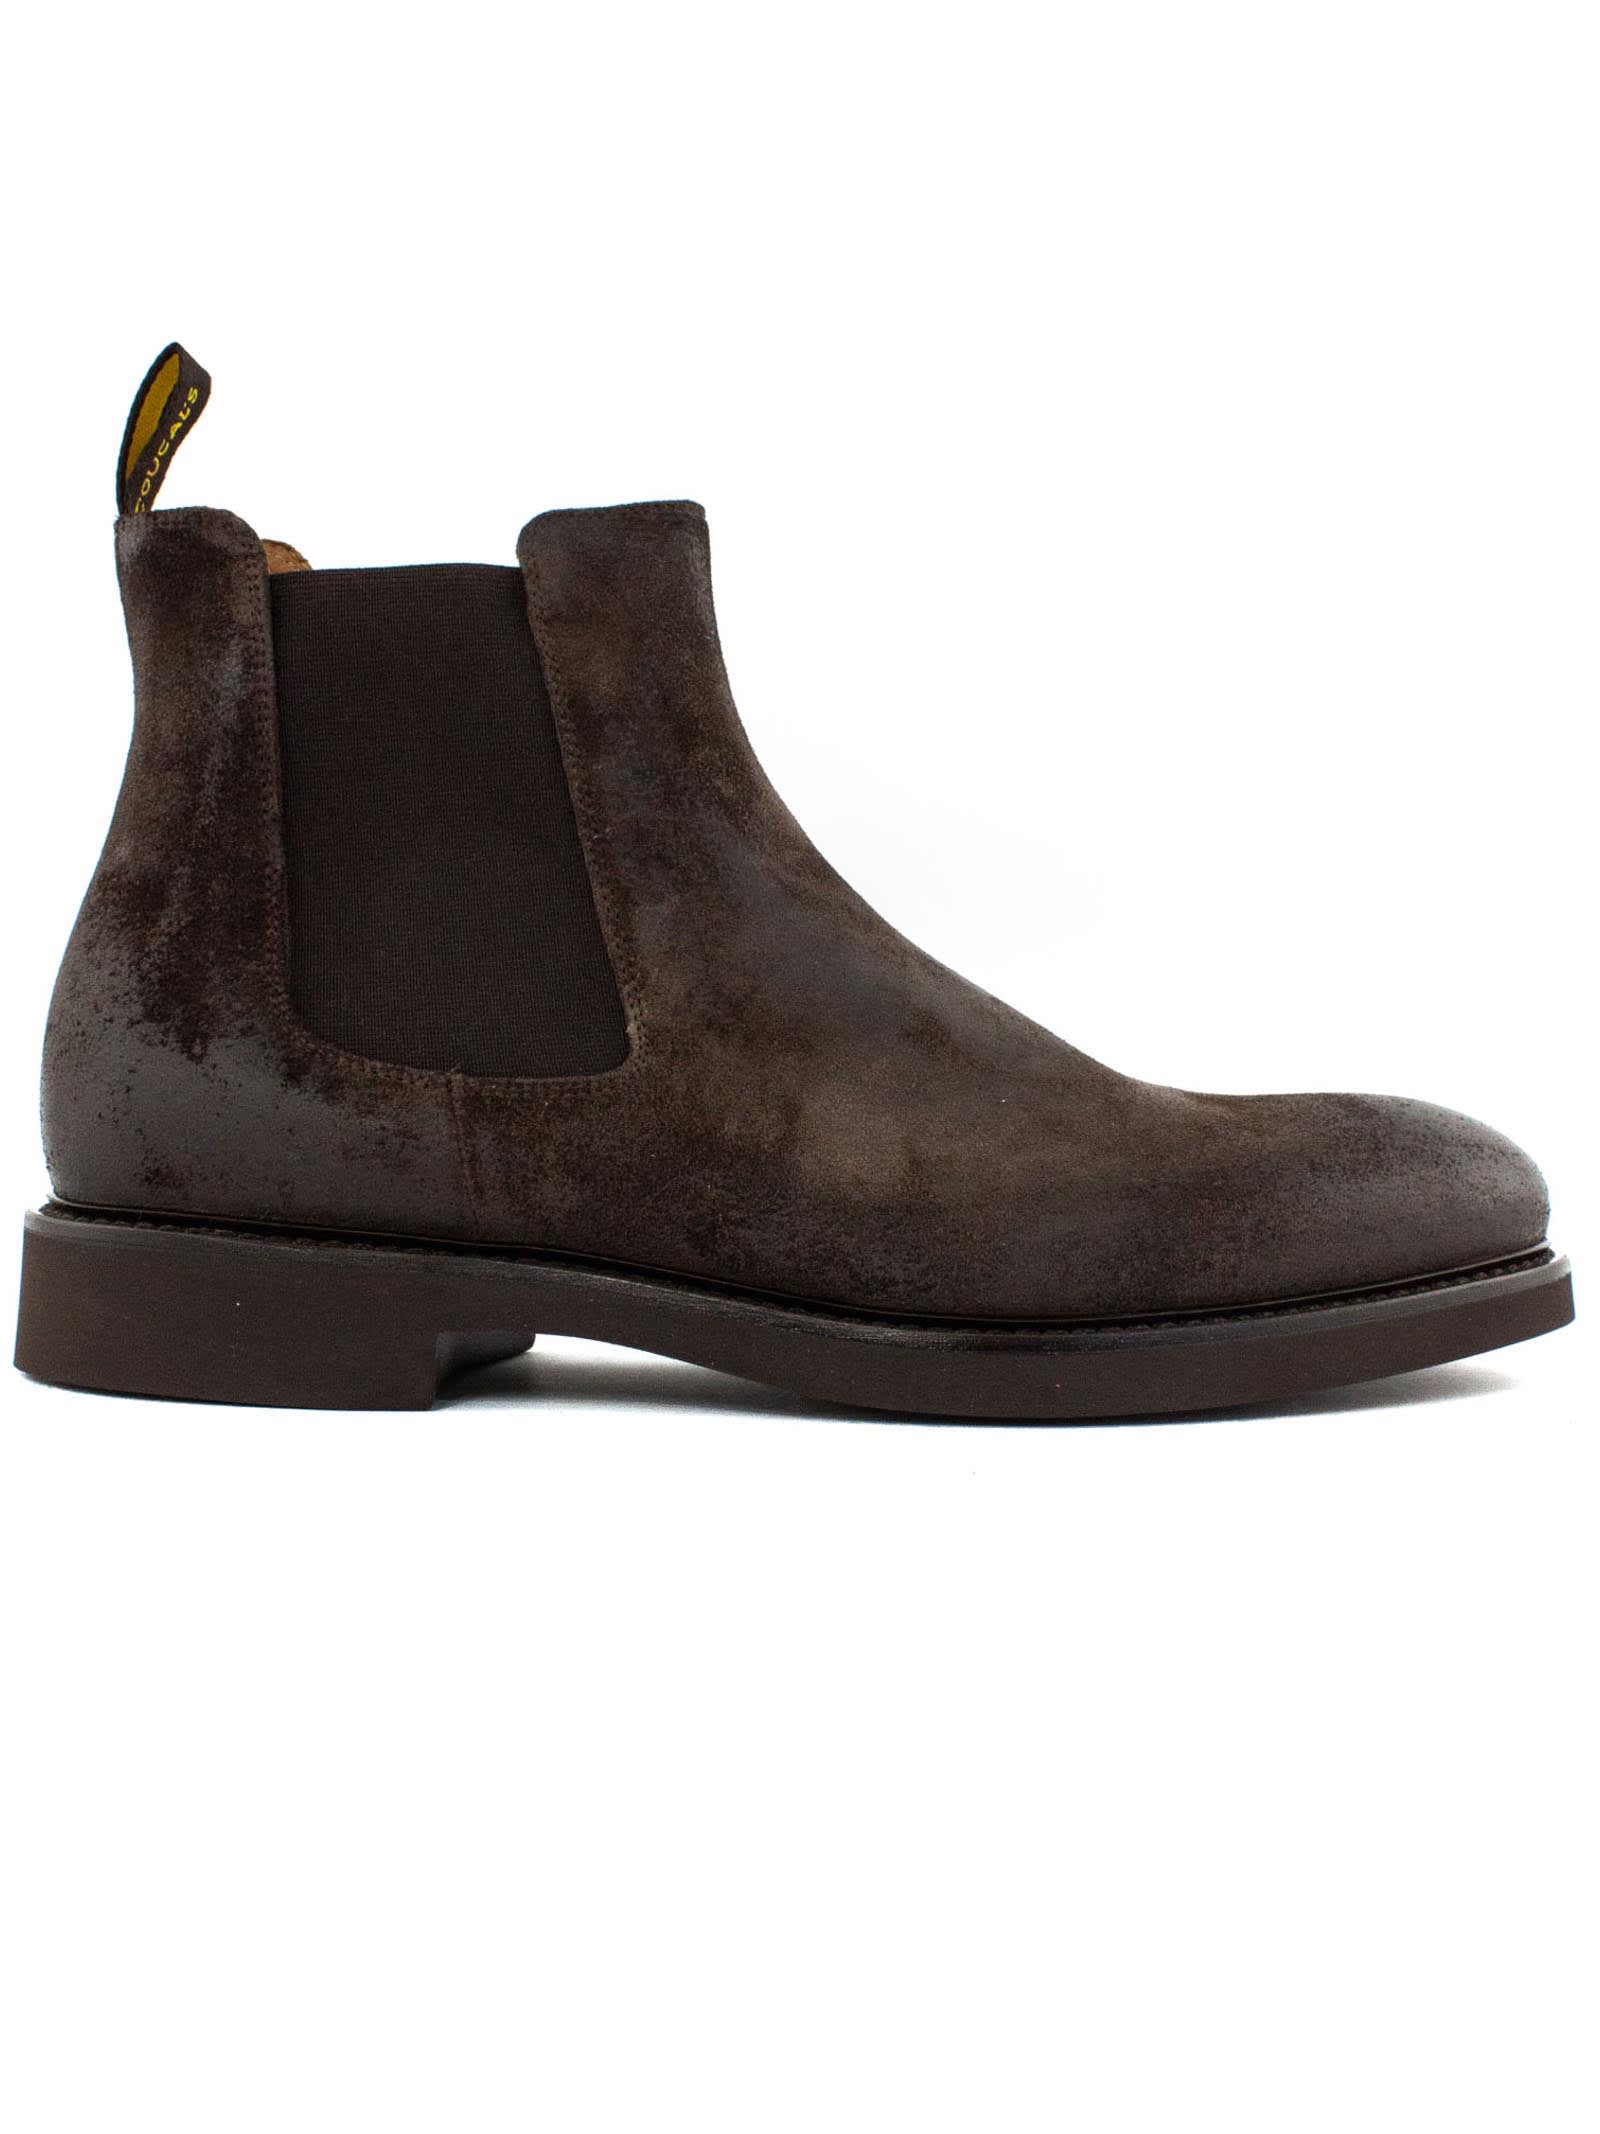 Doucals Dark Brown Oil Suede Ankle Boot